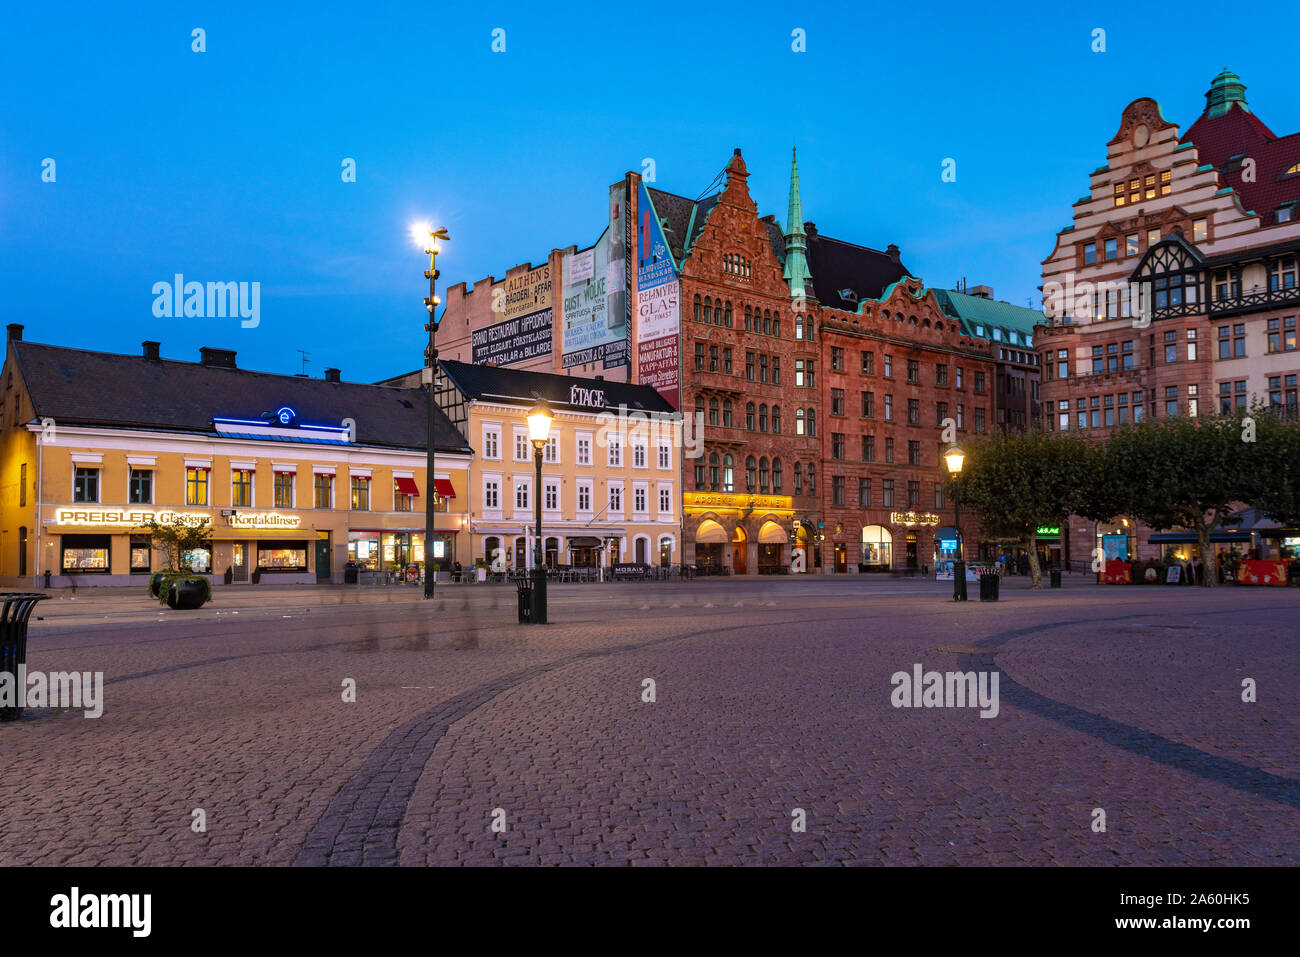 Buildings at city square against clear blue sky at dusk in Malmo, Sweden Stock Photo